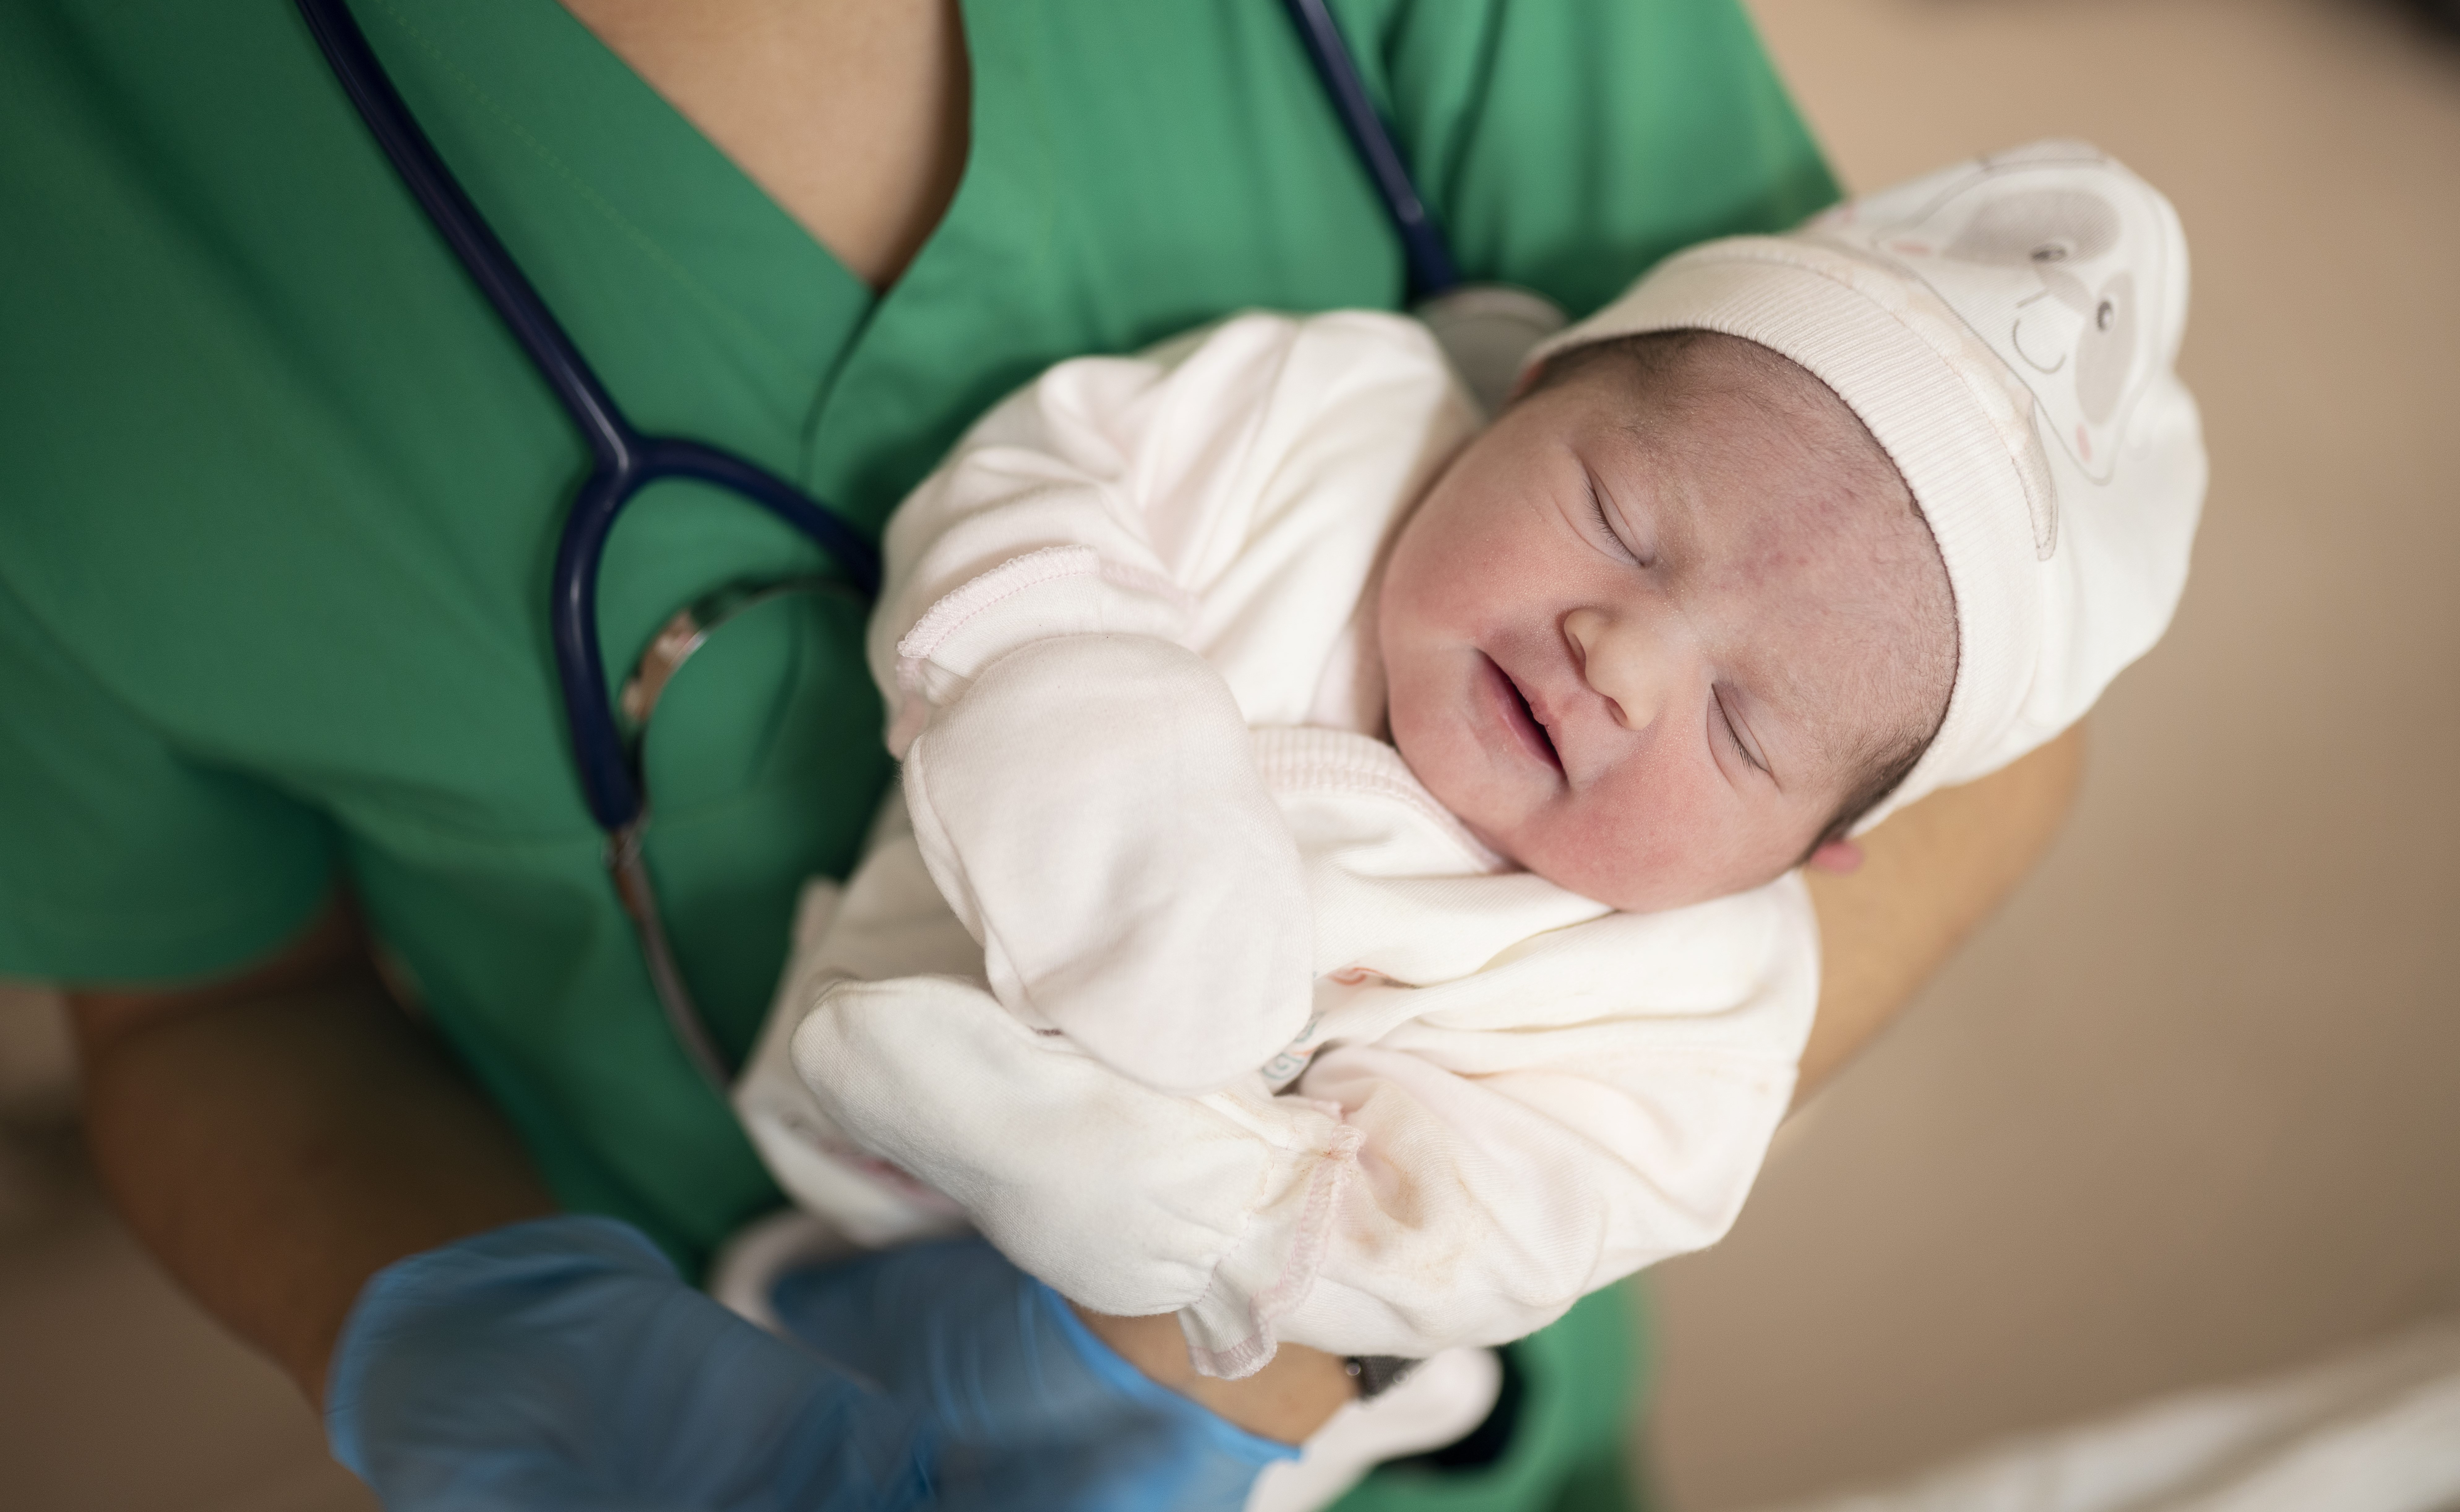 A doctor wearing green scrubs with a stethoscope around her neck holds an infant wearing white footie pajamas and white cap